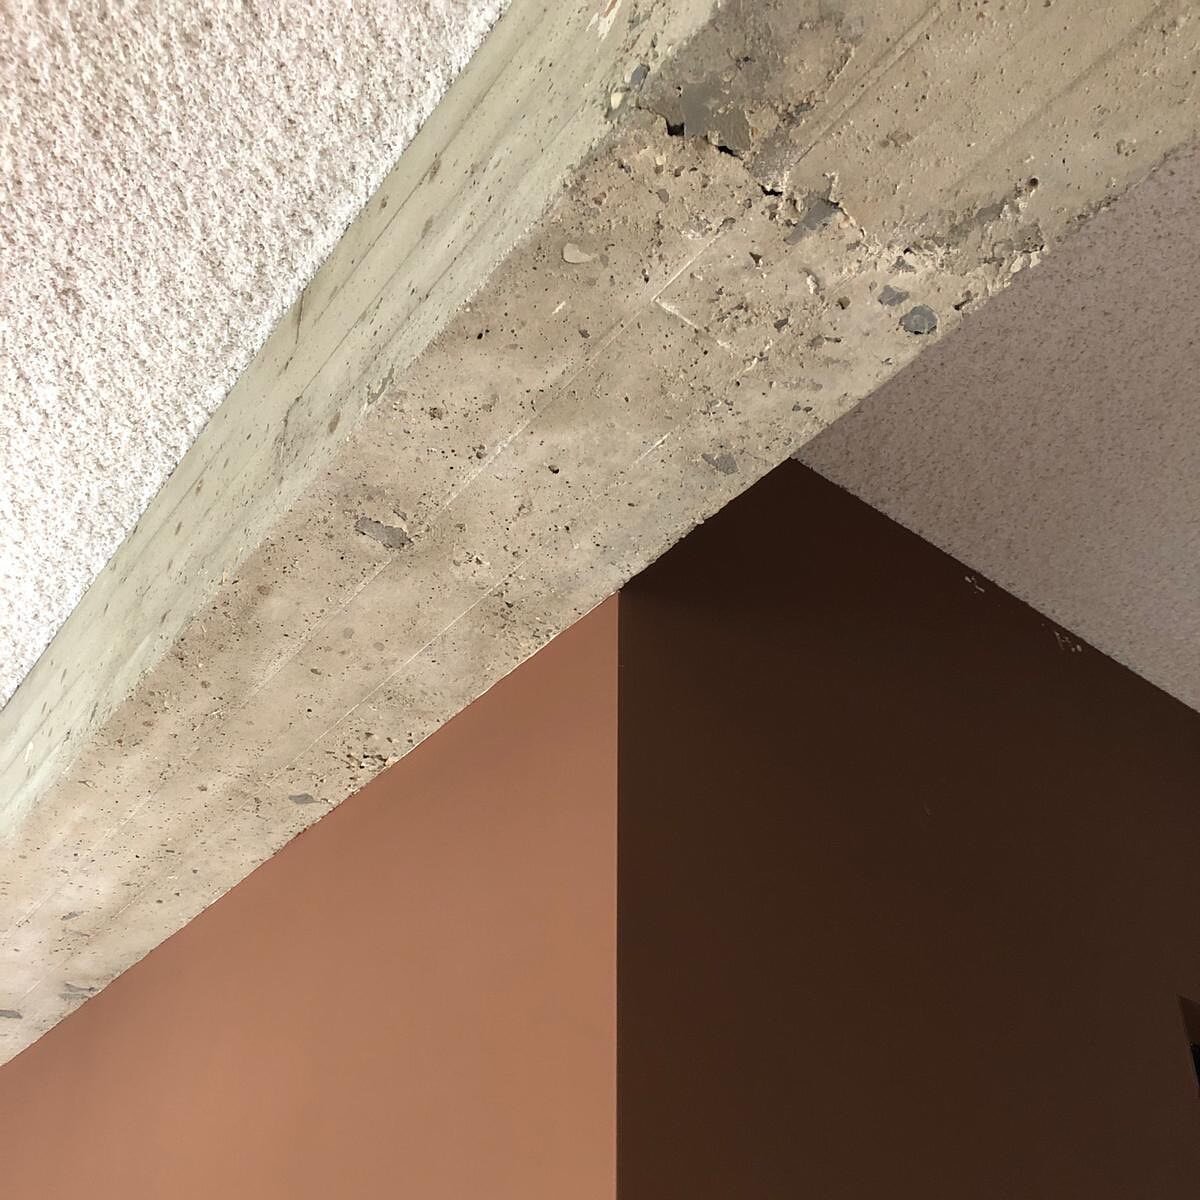 Rough concrete beams in our new office, nicely complemented with paintwork and acoustic ceiling.
#architecture #design #newoffice #ceiling #rotterdam #colourpalette #goudsesingel #firma230 @firma230 #work #concrete # structure